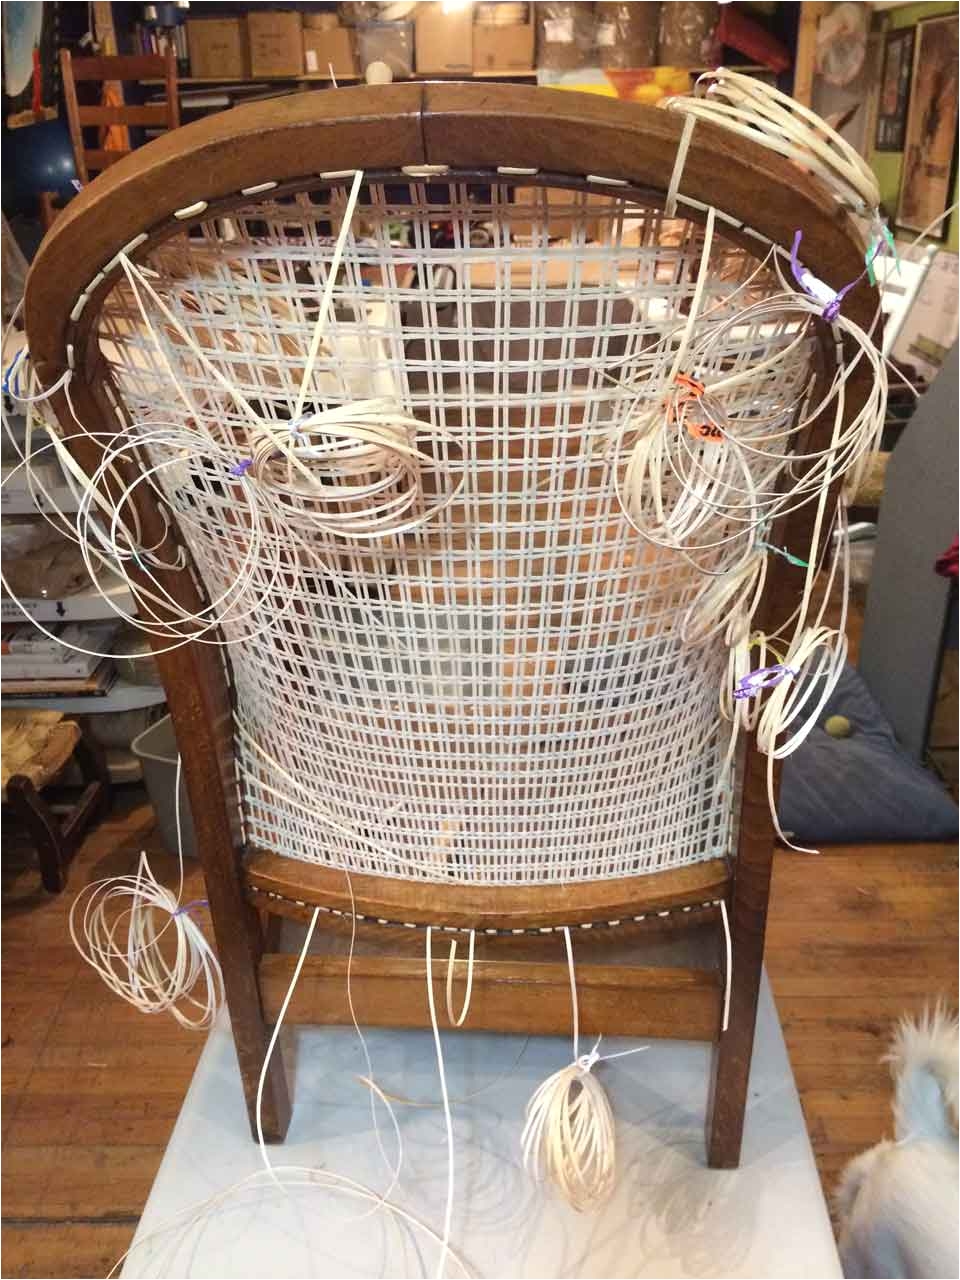 Chair Caning Supplies asheville Nc Silver River Center for Chair Caning A Curved Back Advanced Lace Cane